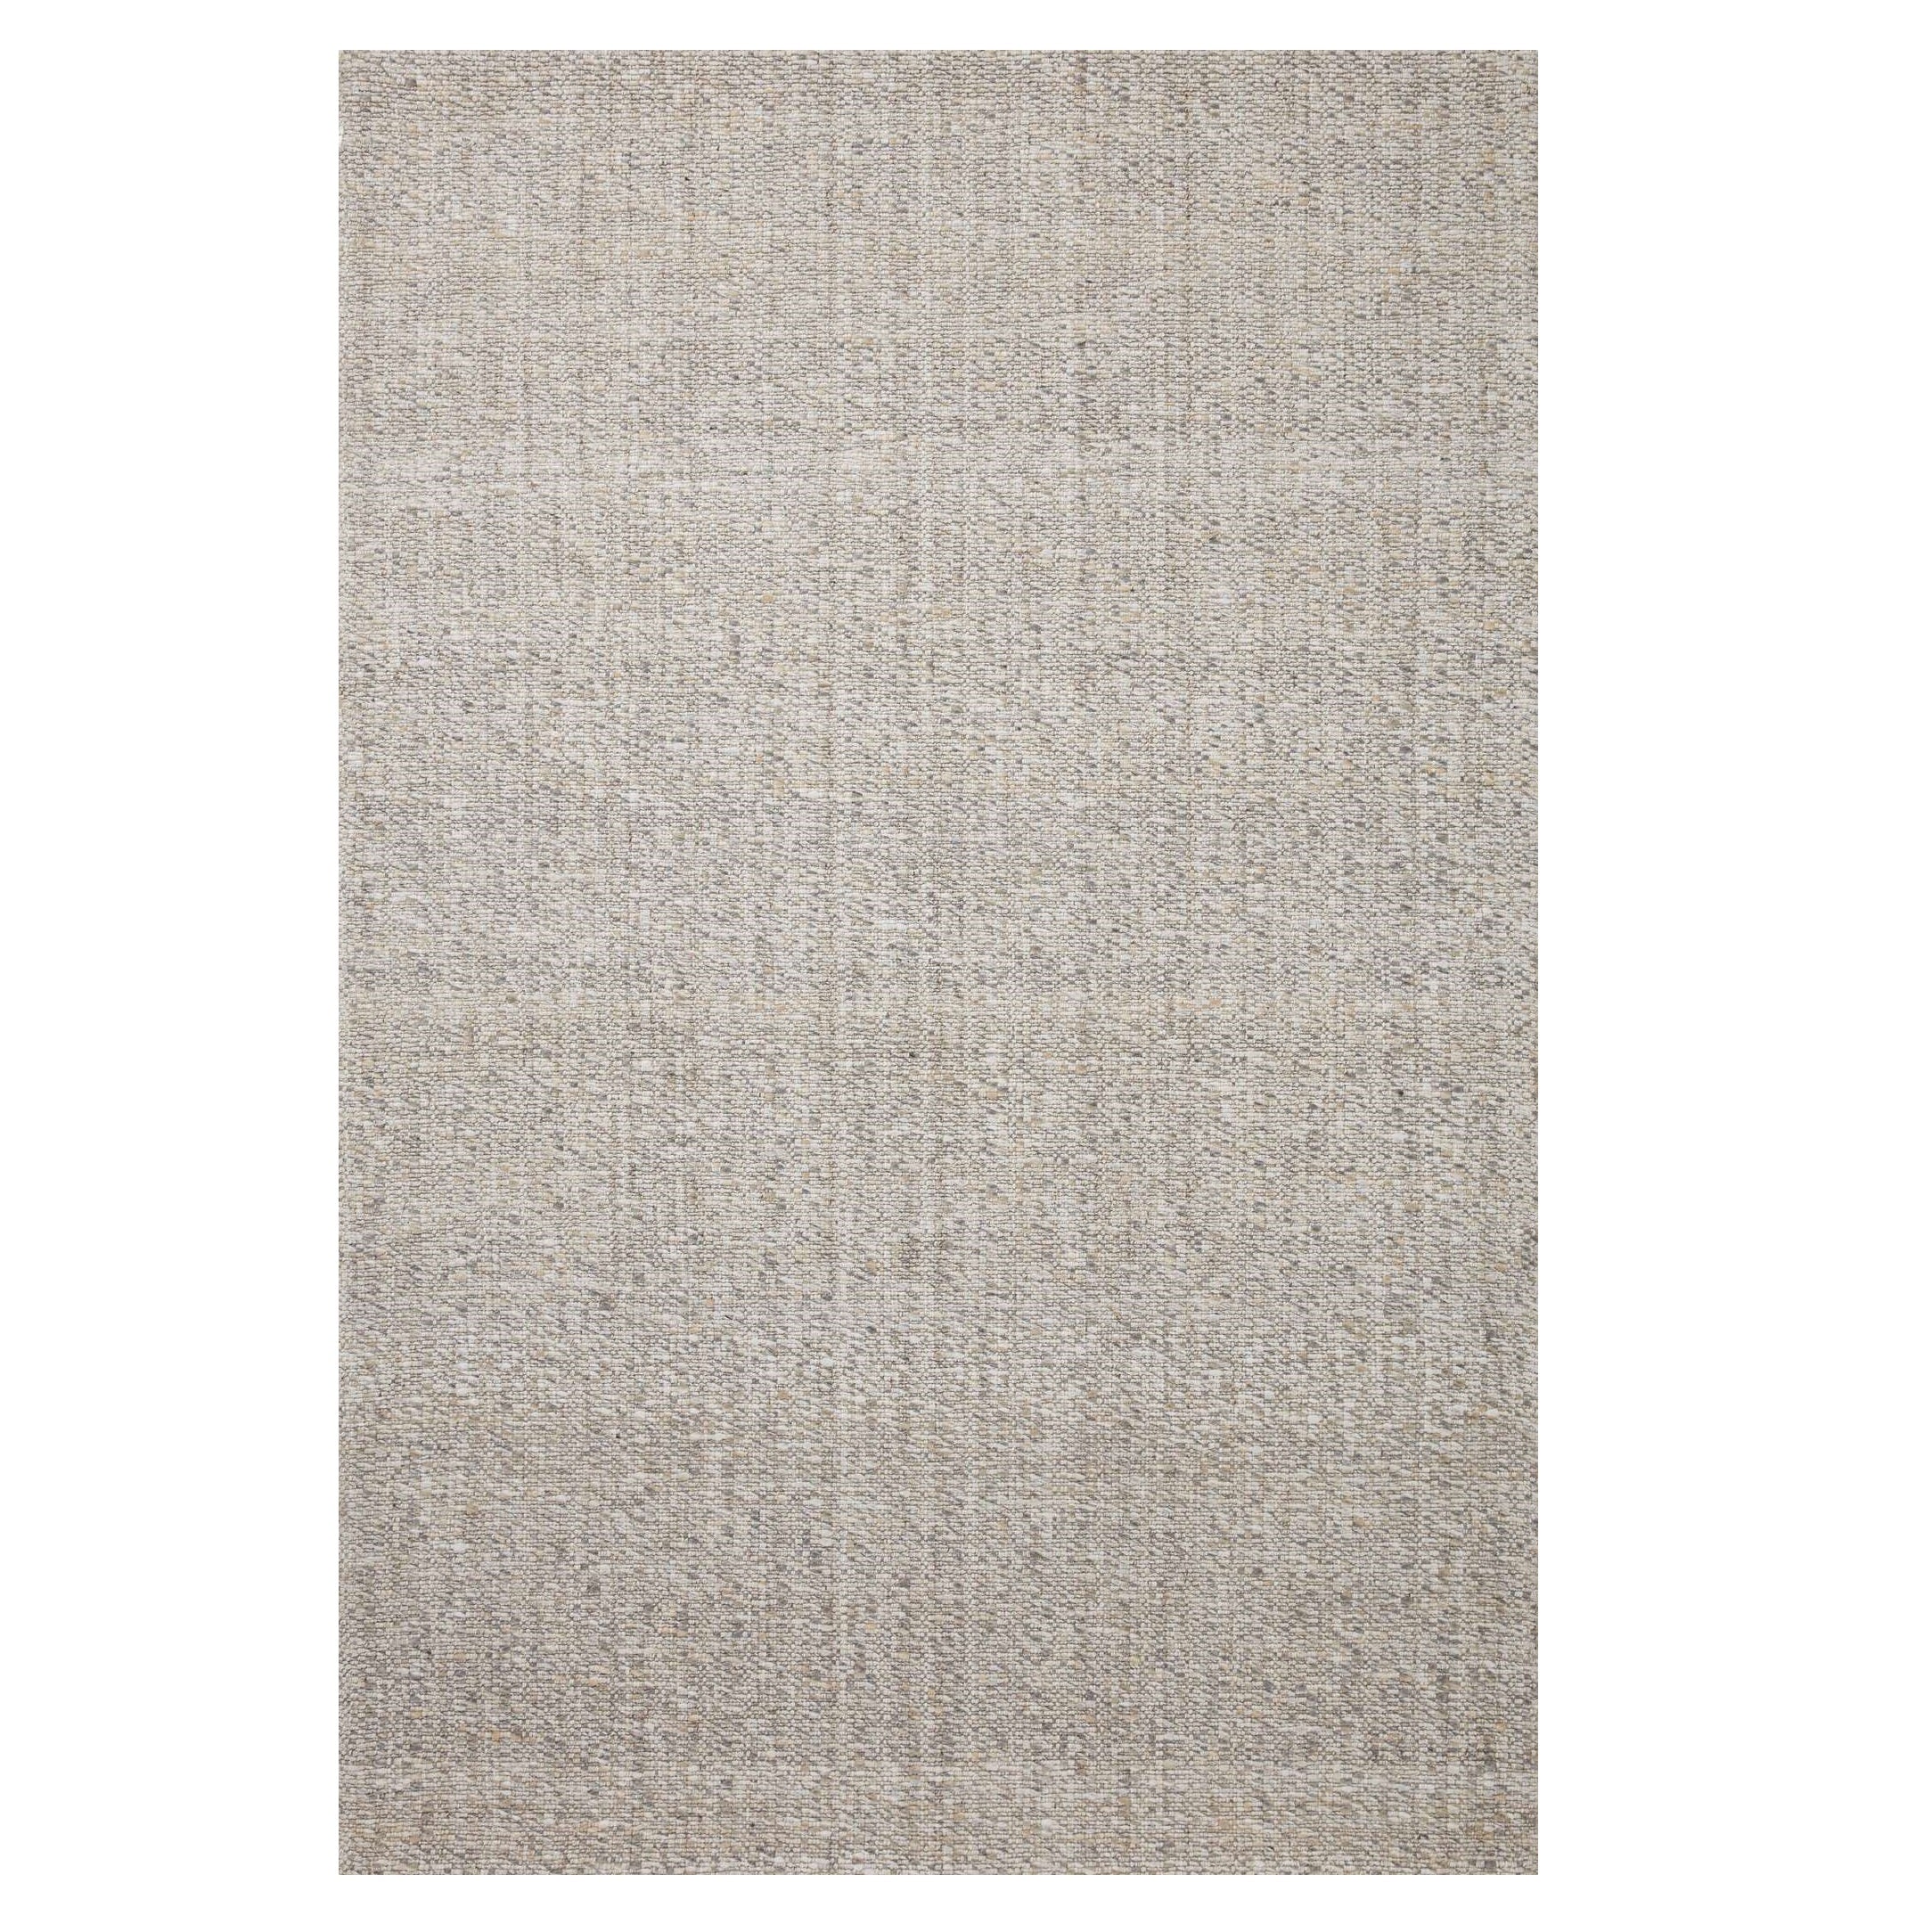 Pippa Silver Rug Items range from $139.00 to $1949.00